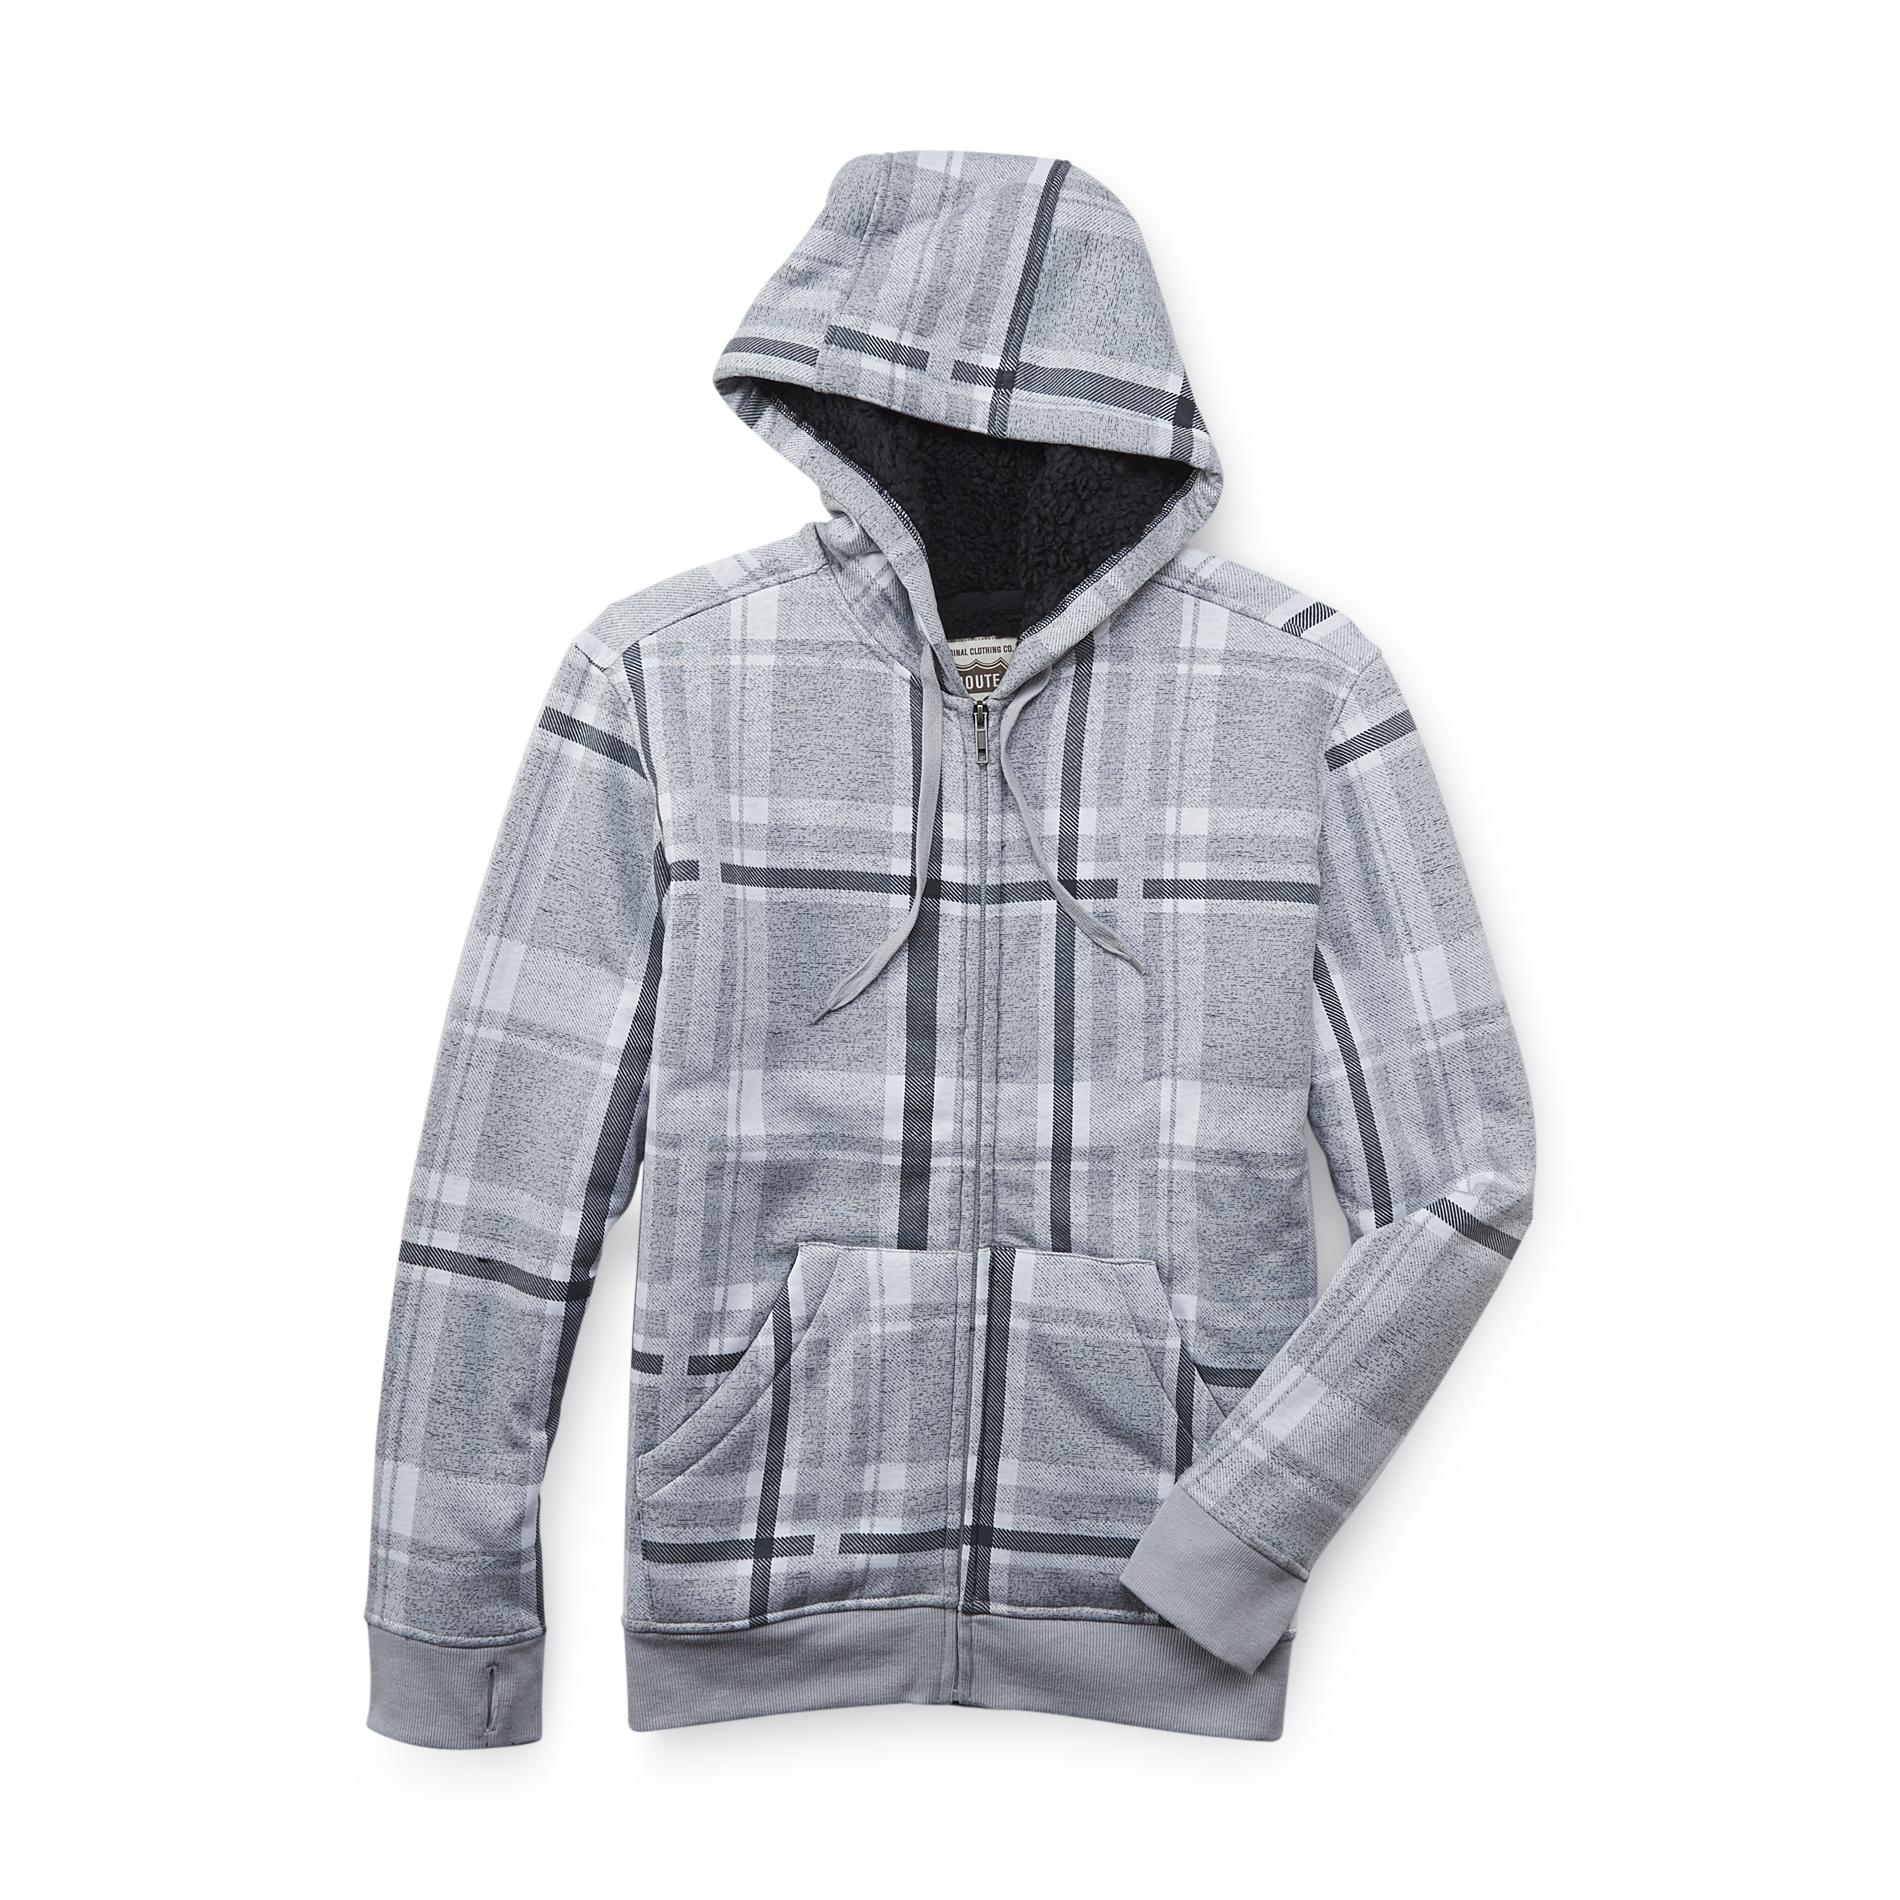 Route 66 Men's Hoodie Jacket - Faded Checks